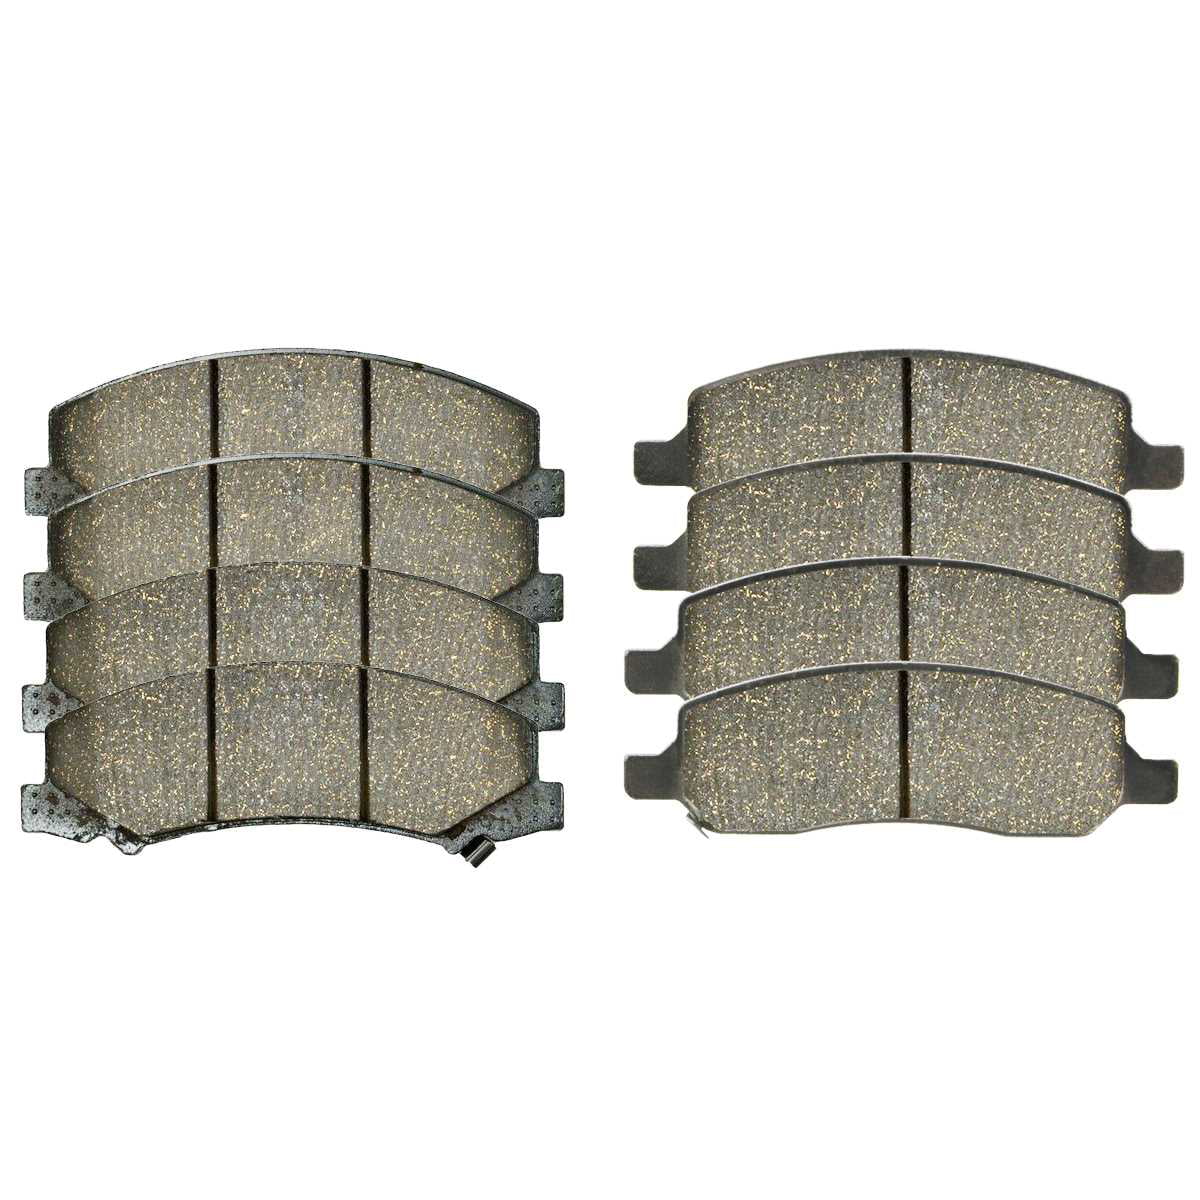 Front & Rear Ceramic Disc Brake Pads For 2006-2011 Buick Lucerne Cadillac DTS